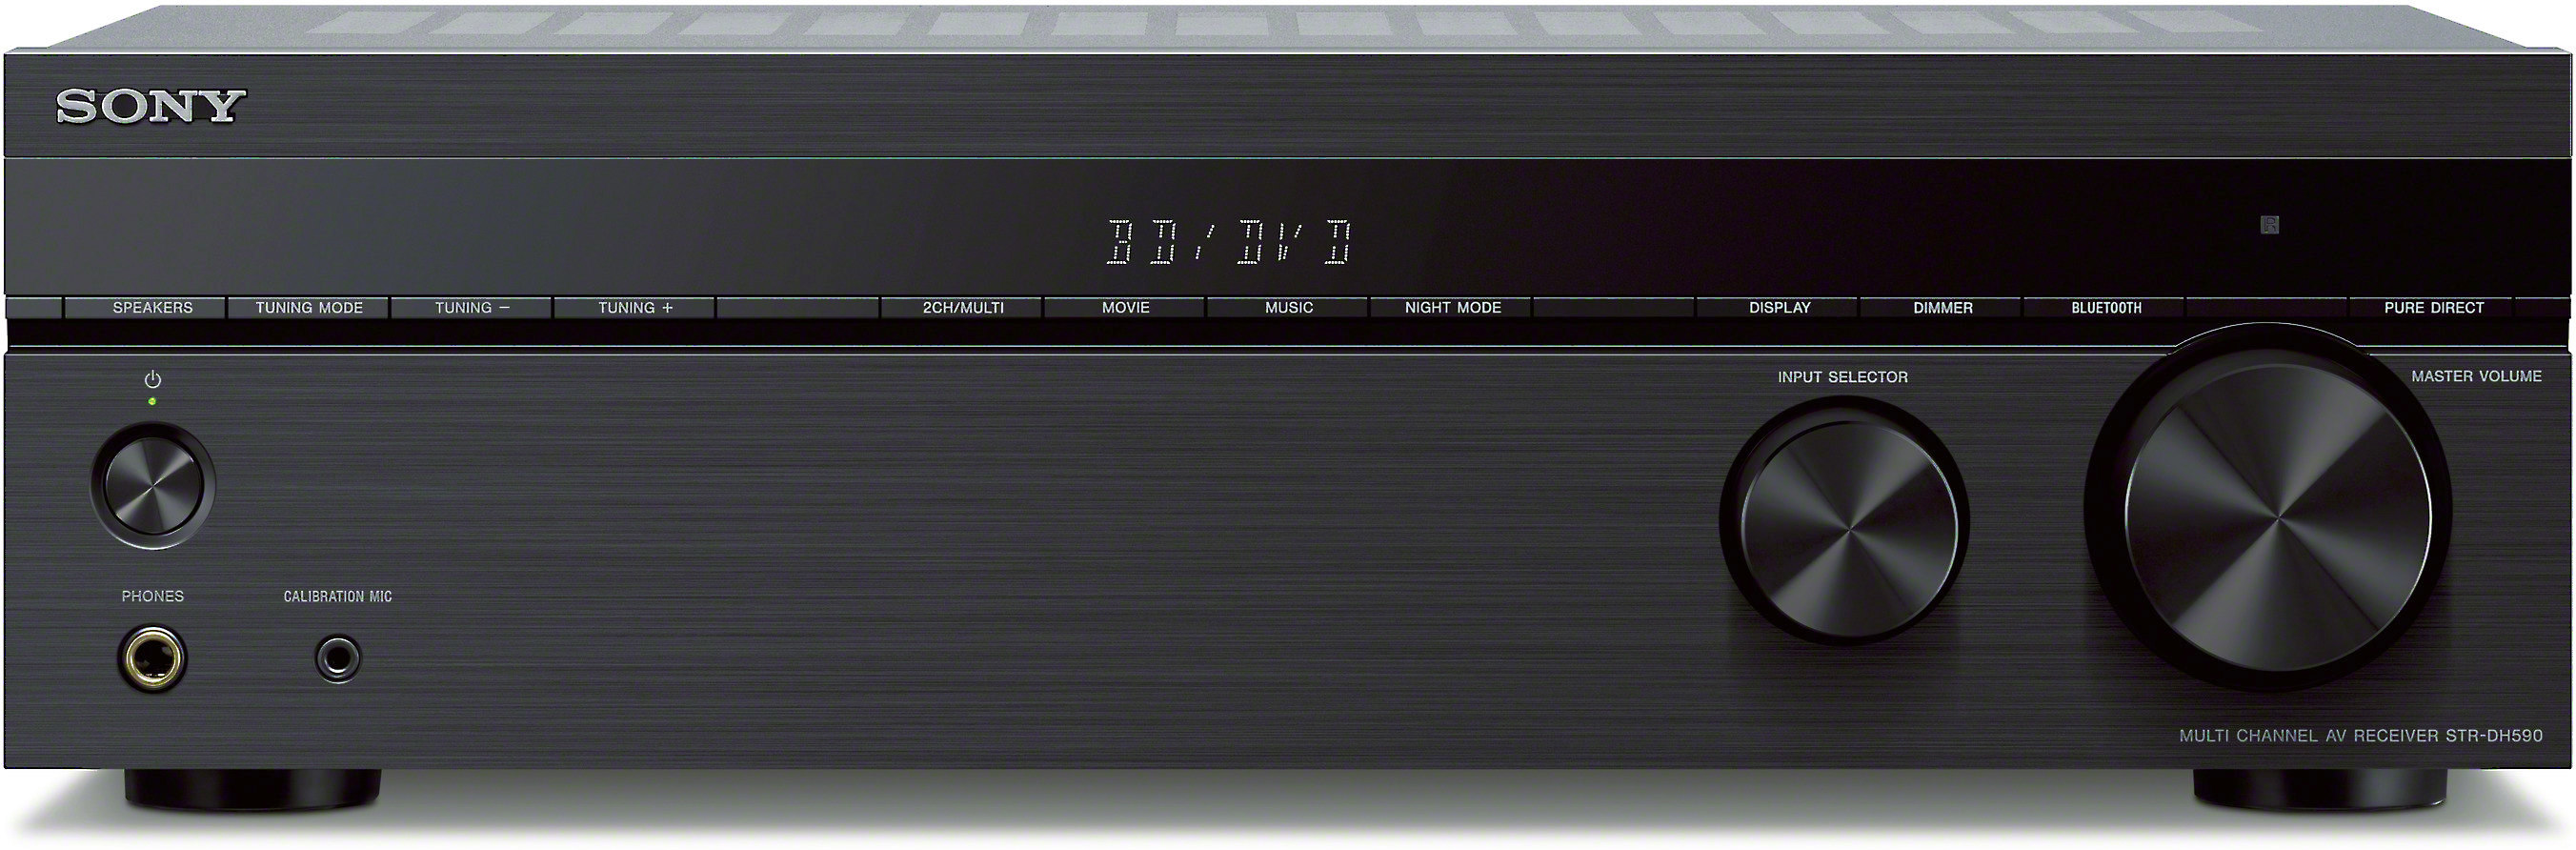 Sony Home Theater Receivers At Crutchfield